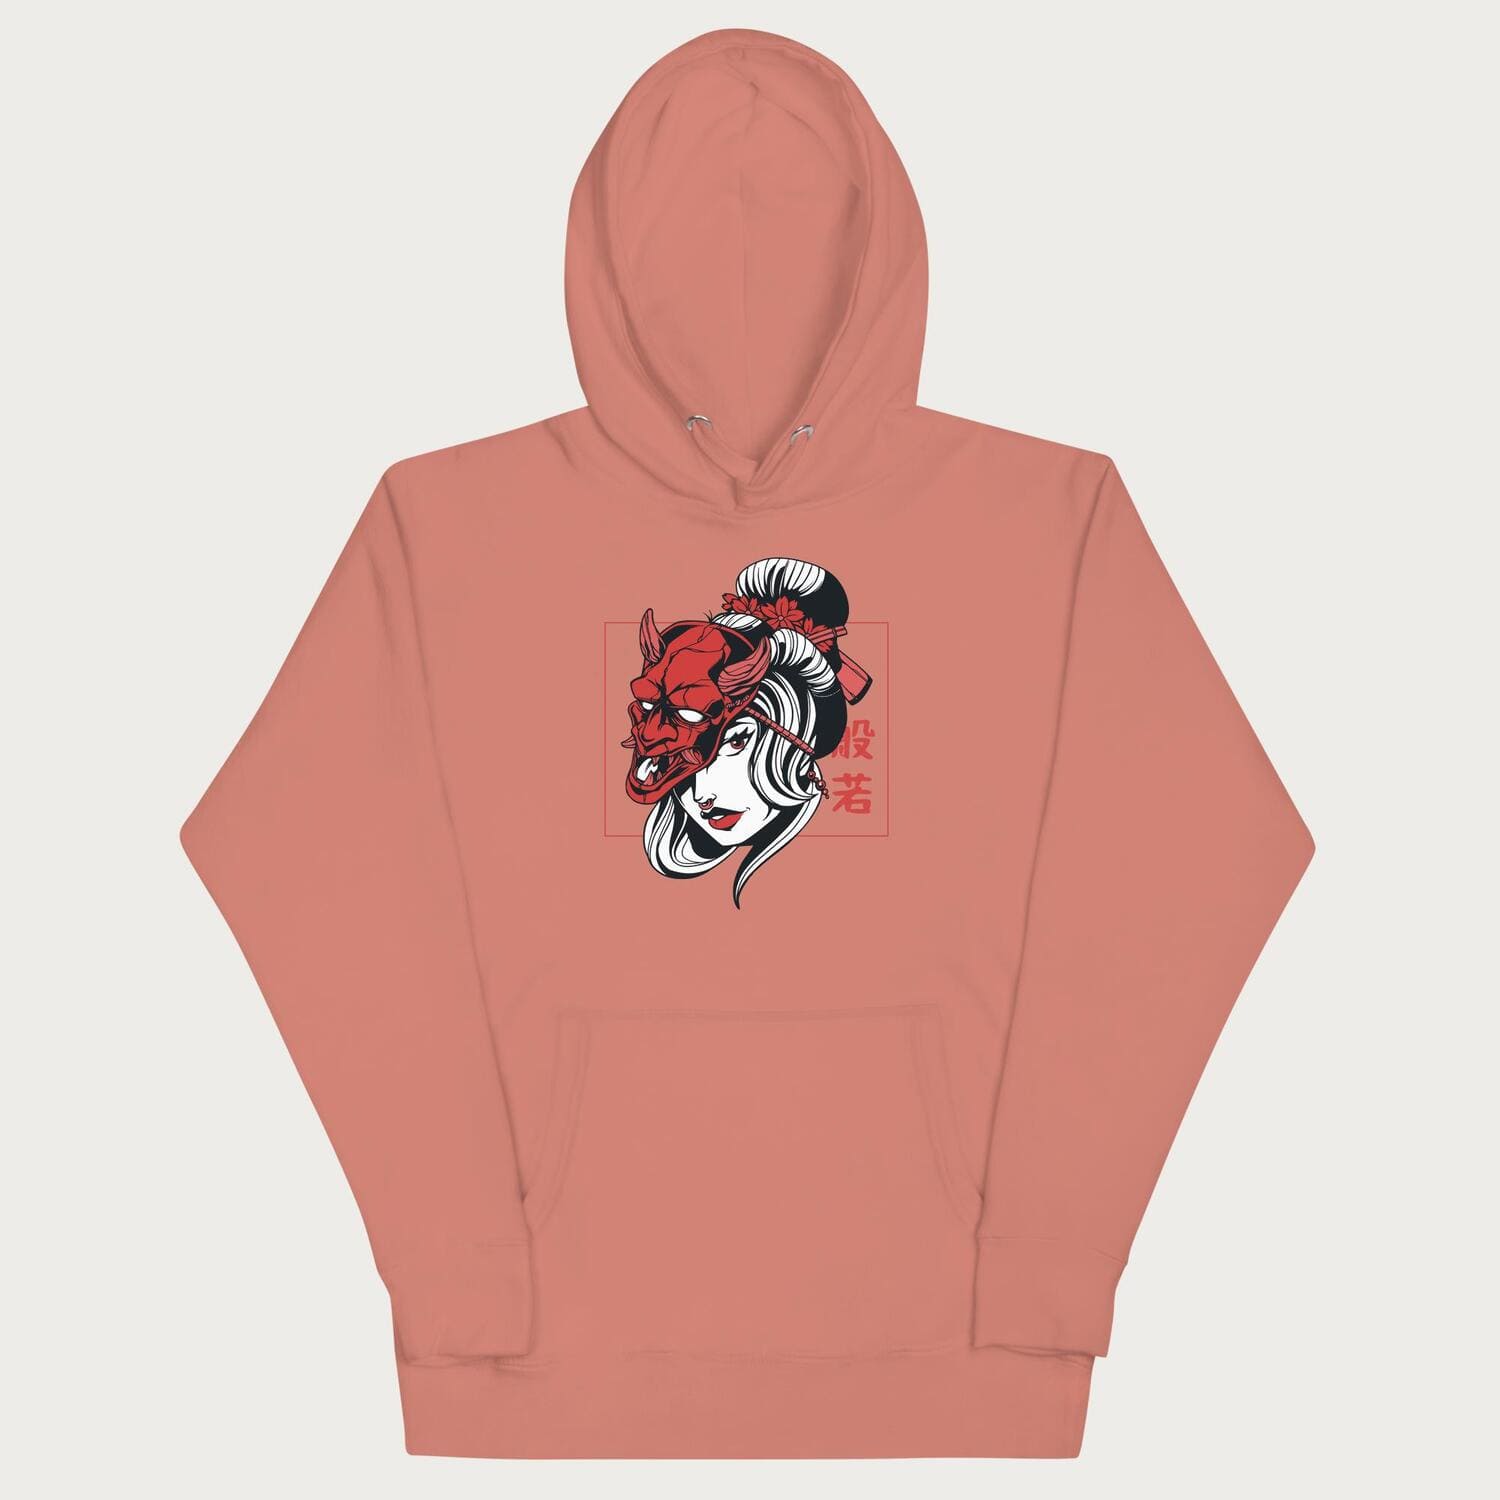 Light pink hoodie with a japanese geisha and hannya mask graphic.